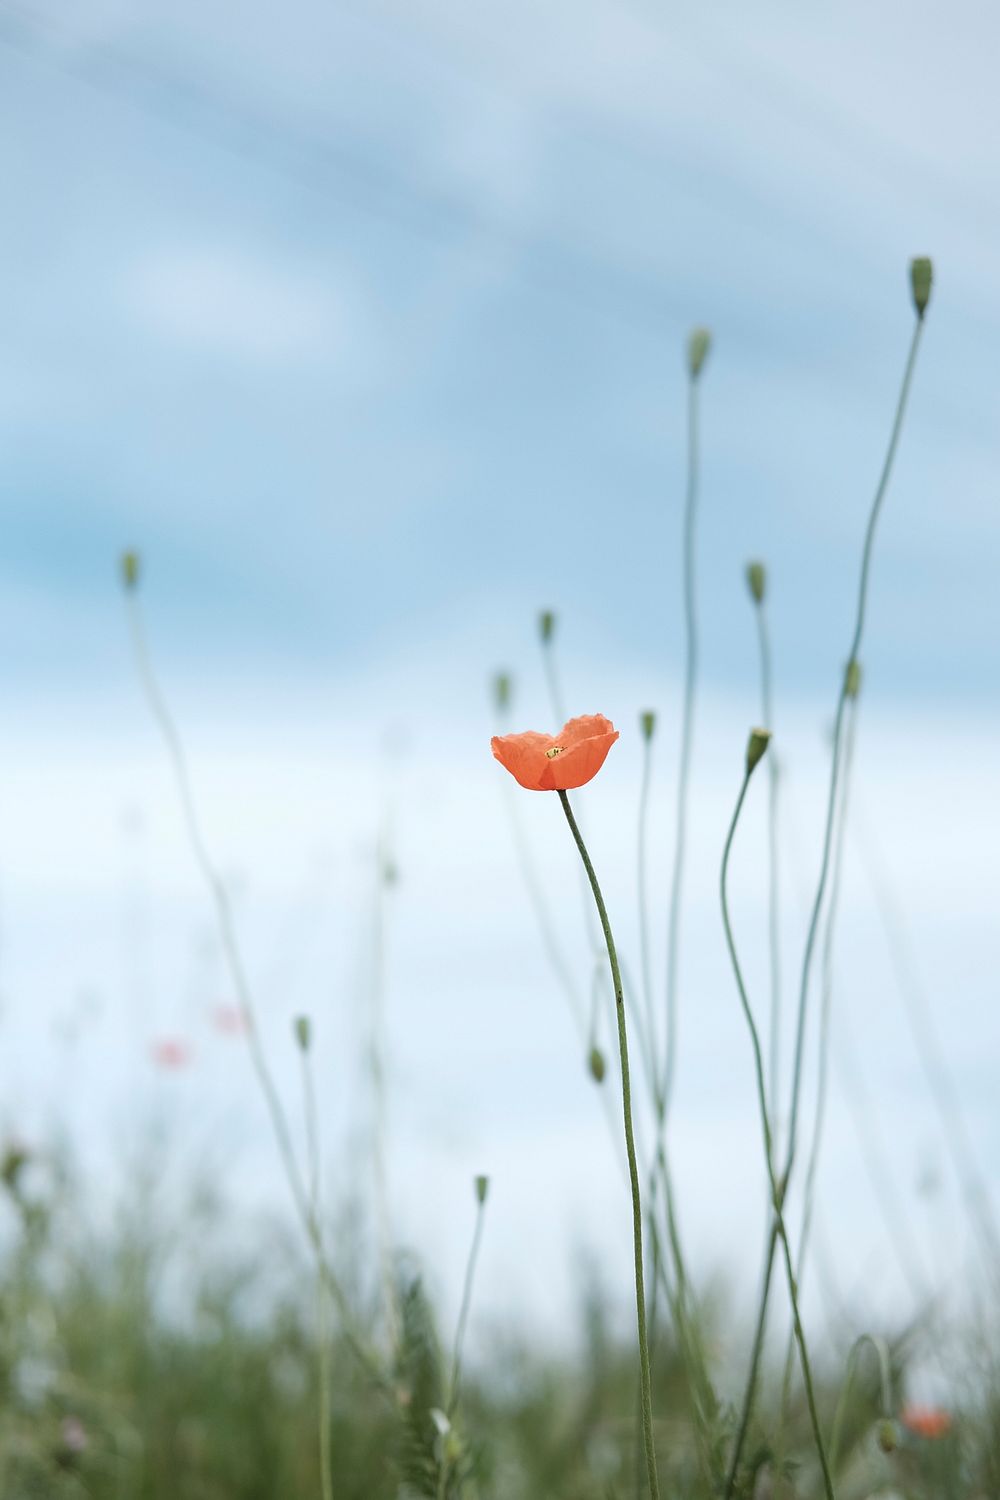 Orange flower blooming in the field. Original public domain image from Wikimedia Commons